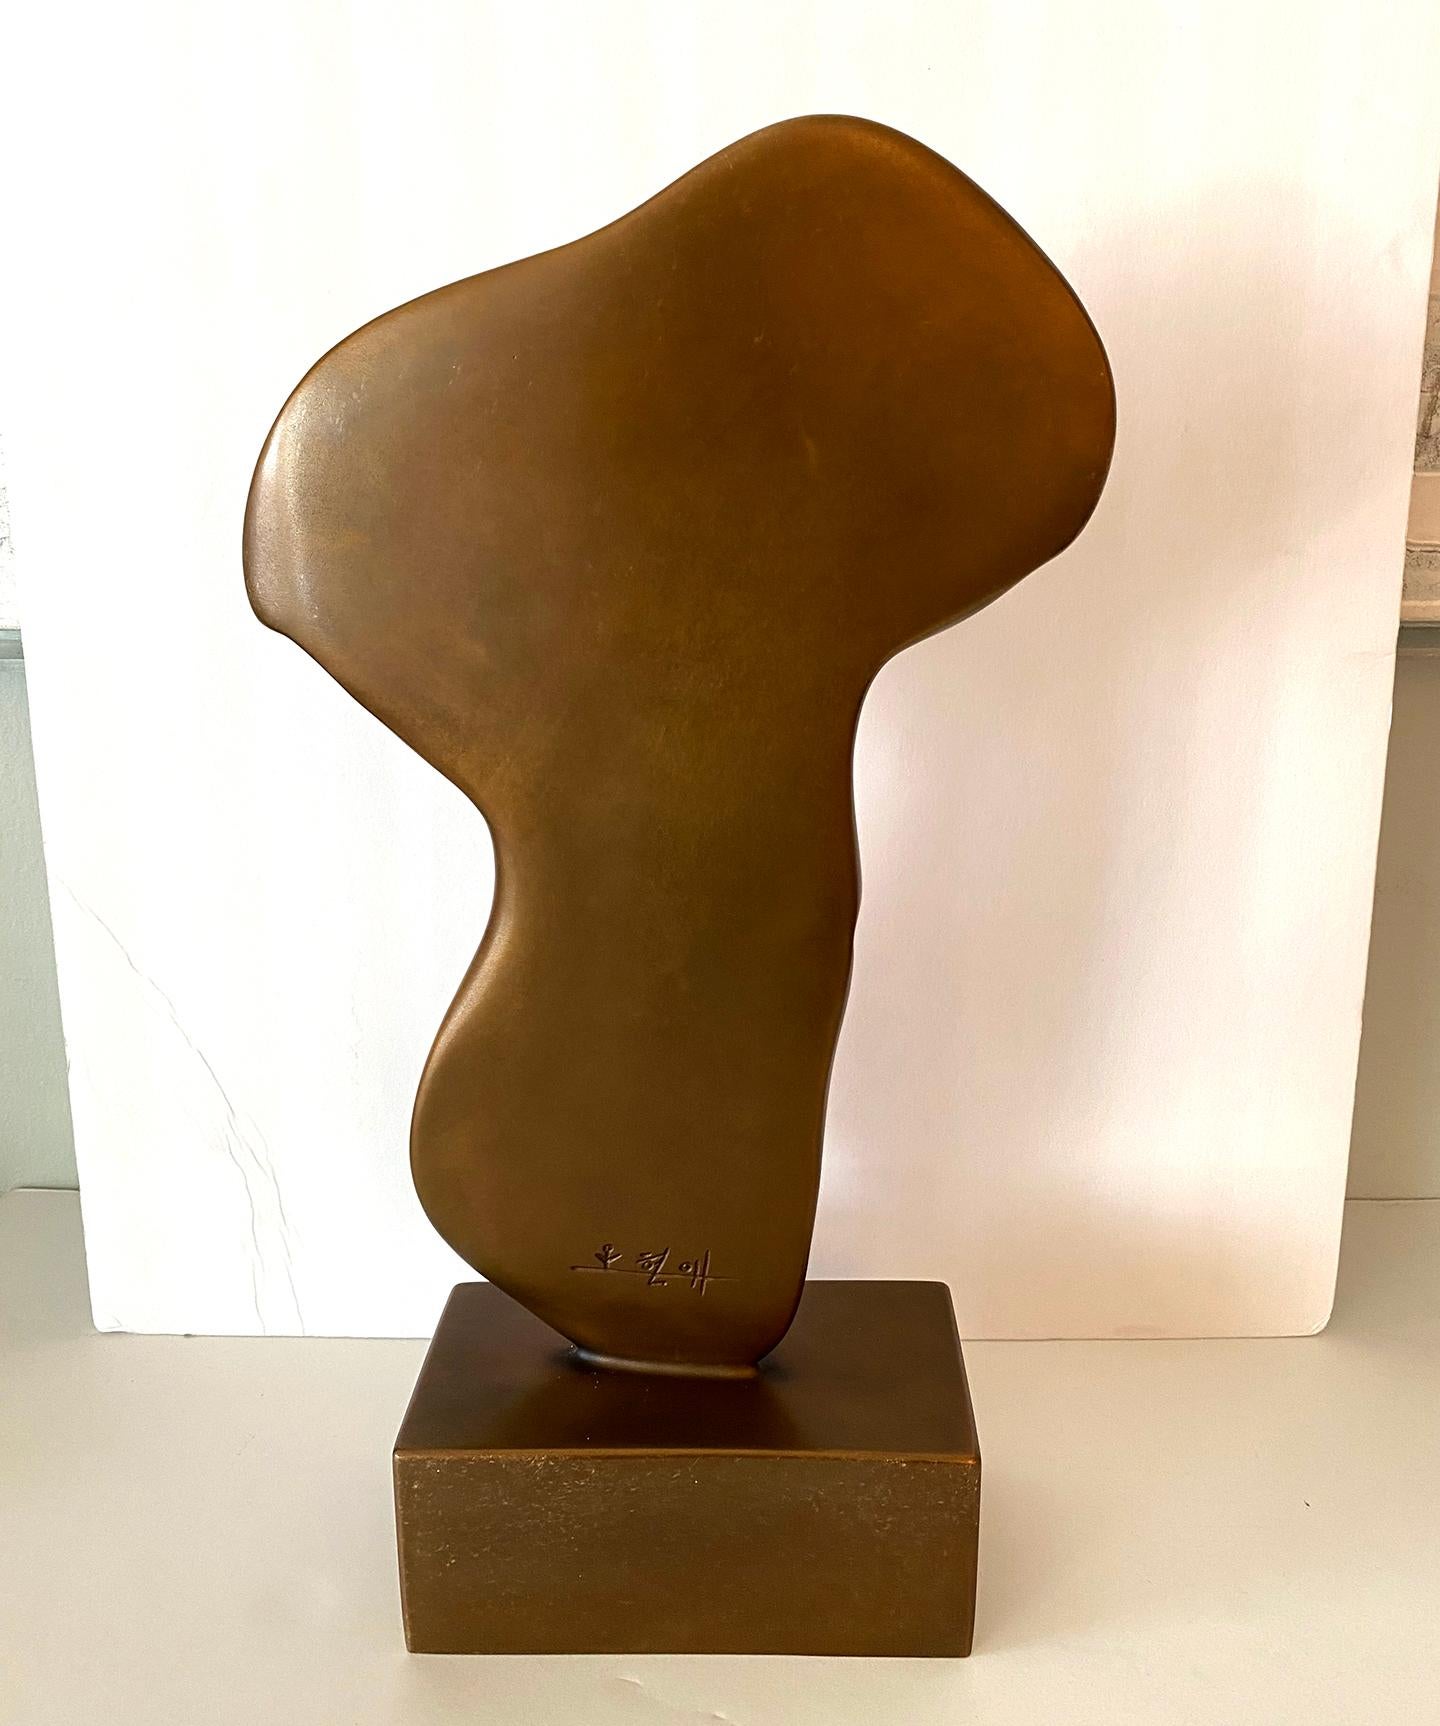 An abstract figural sculpture of a torso by Korean born artist Hyunae Kang.
The twisting torso rests upon a square plinth, all in bronze. Sculpture is signed on revers of base.